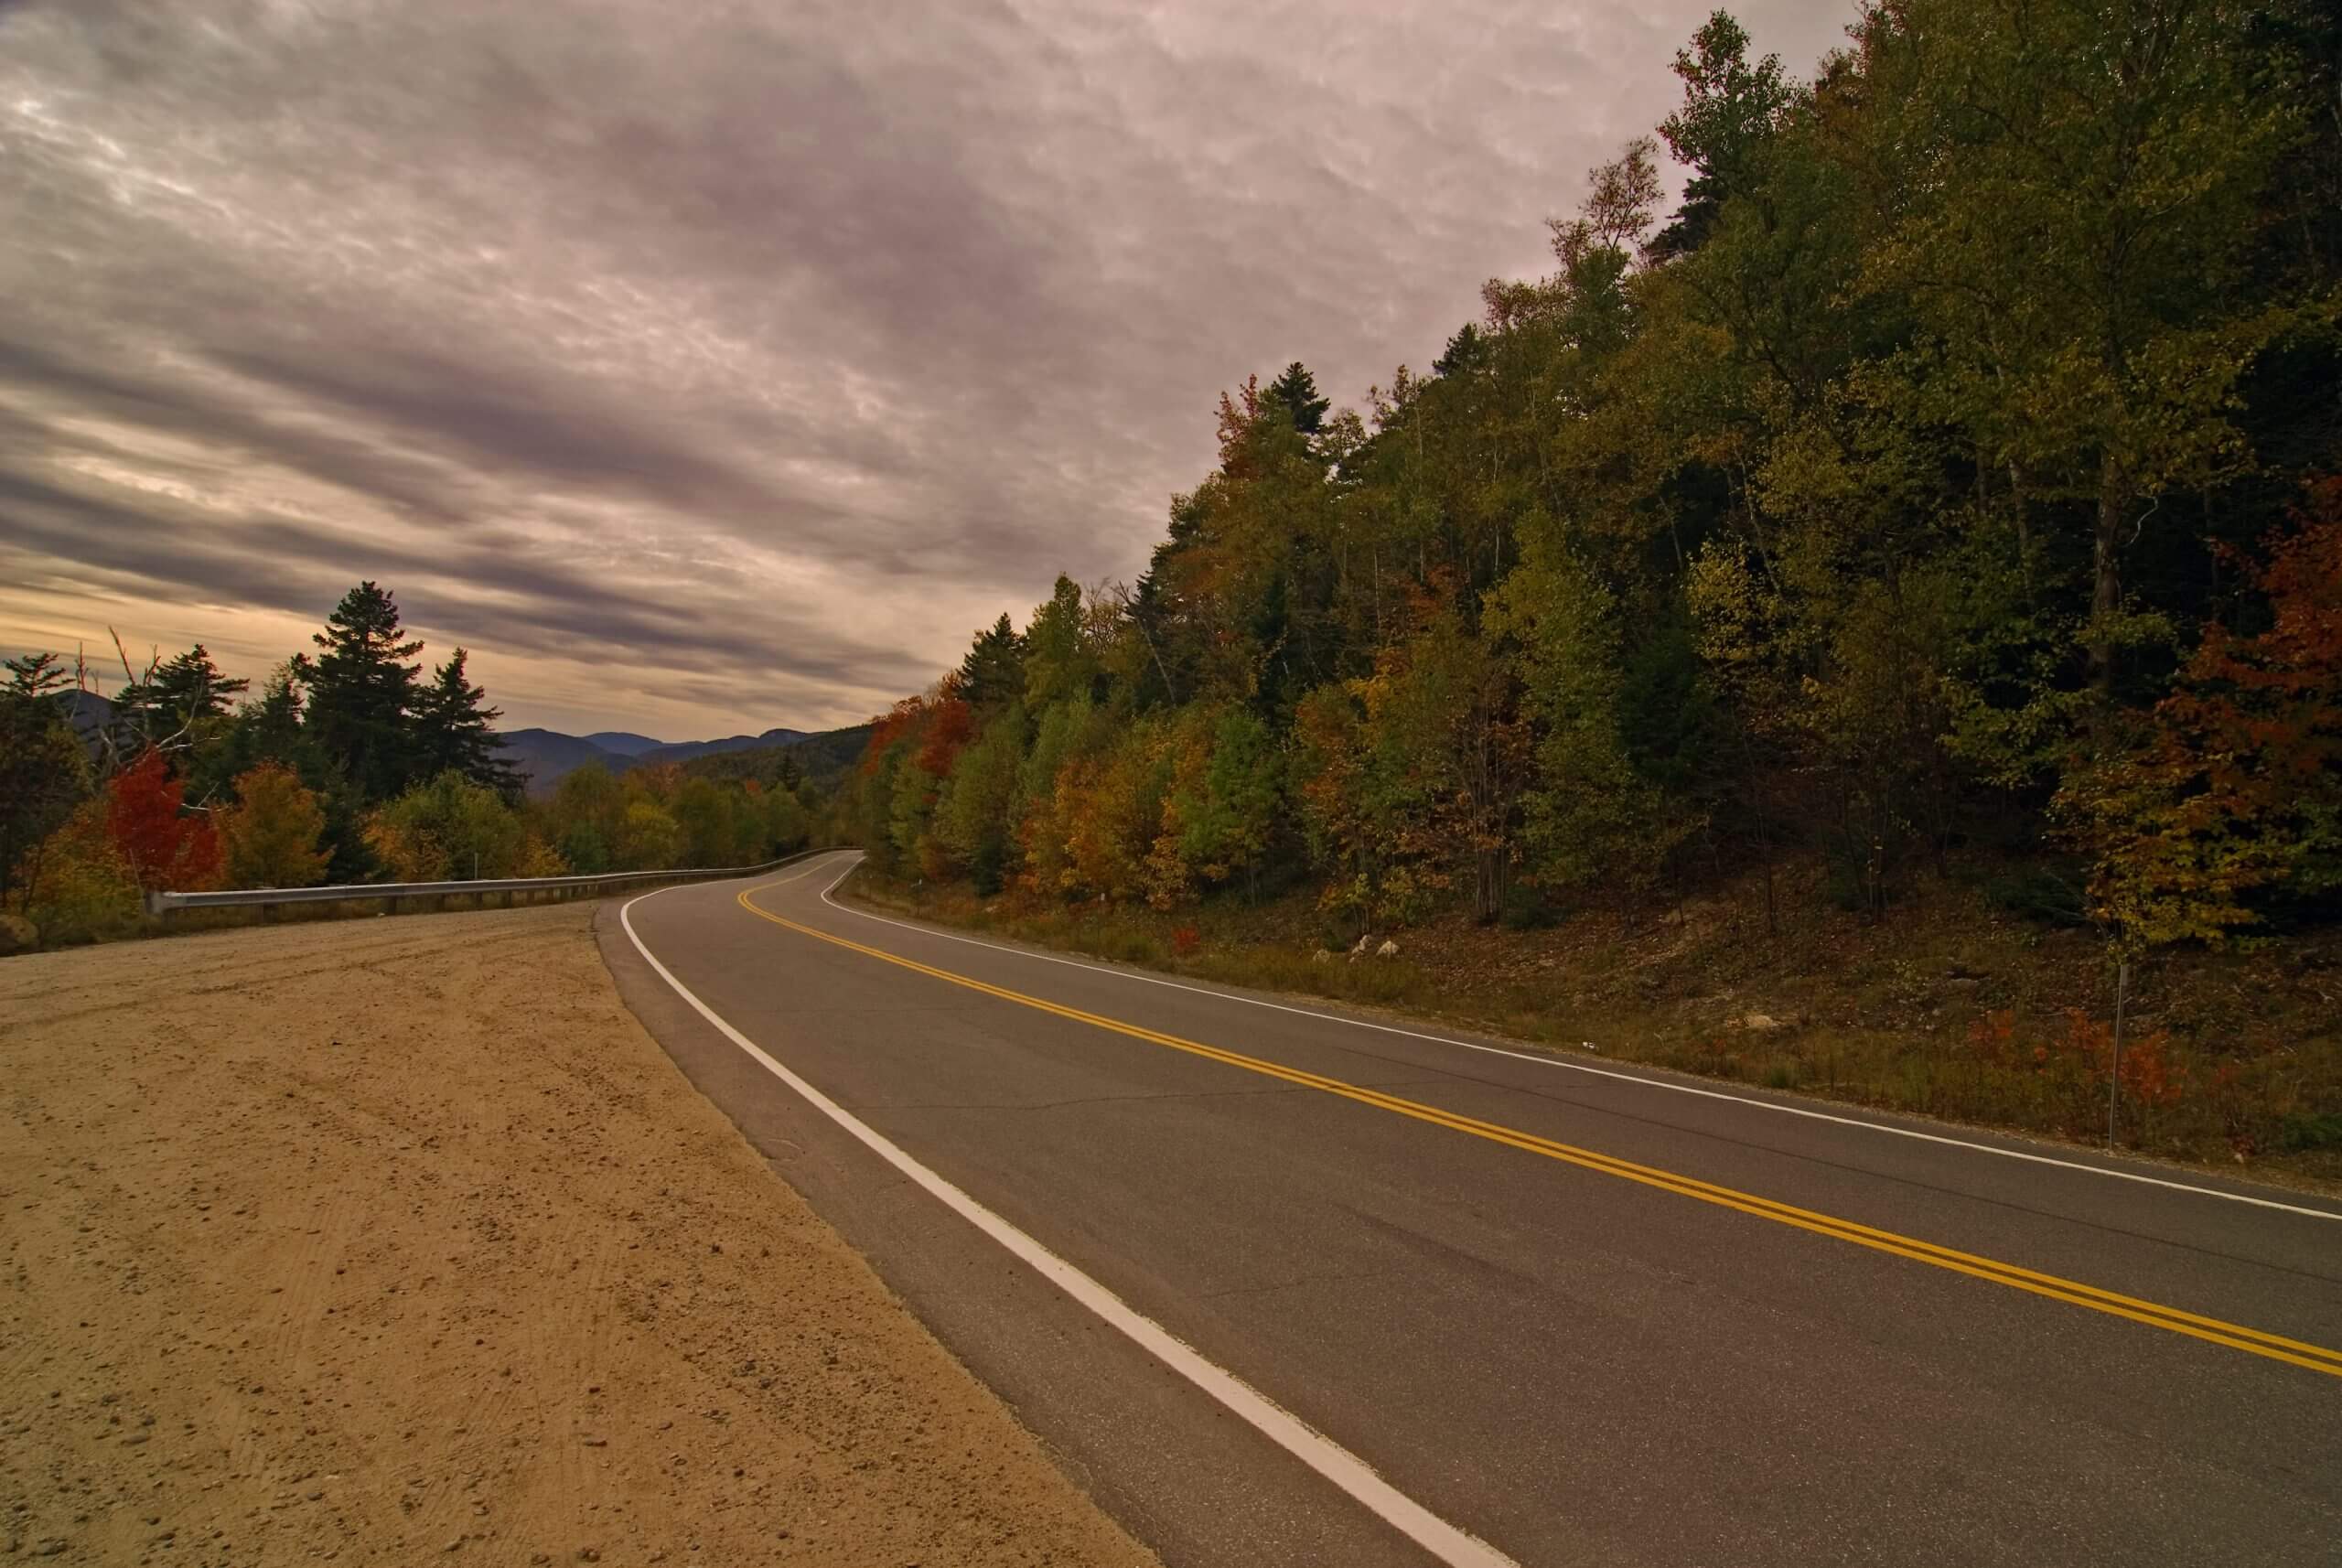 Dusk on the Kancamagus Scenic Highway in New Hampshire's White Mountains. One of the United States most sceninc roads.